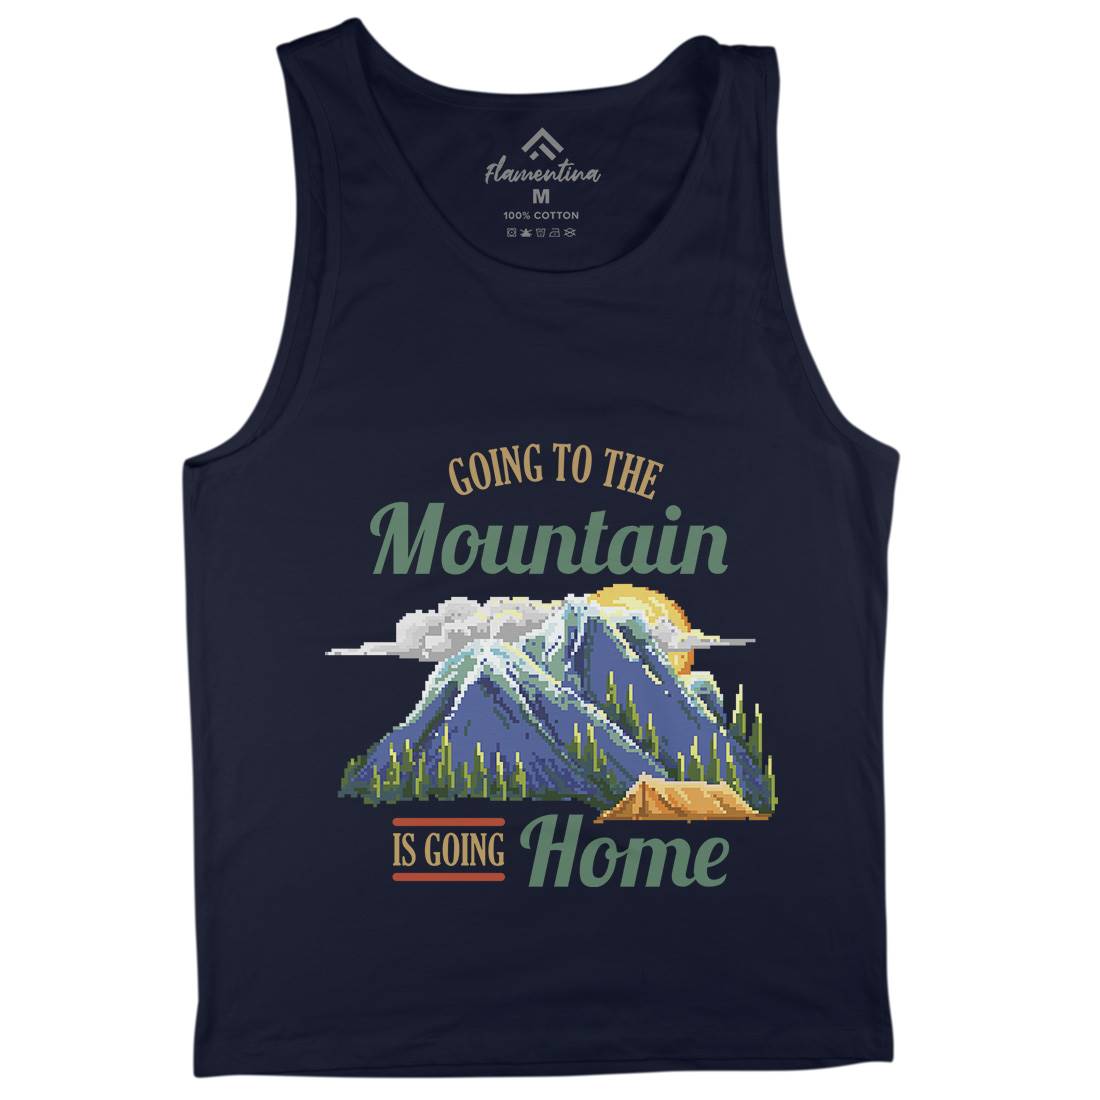 Going To The Mountain Mens Tank Top Vest Nature B905